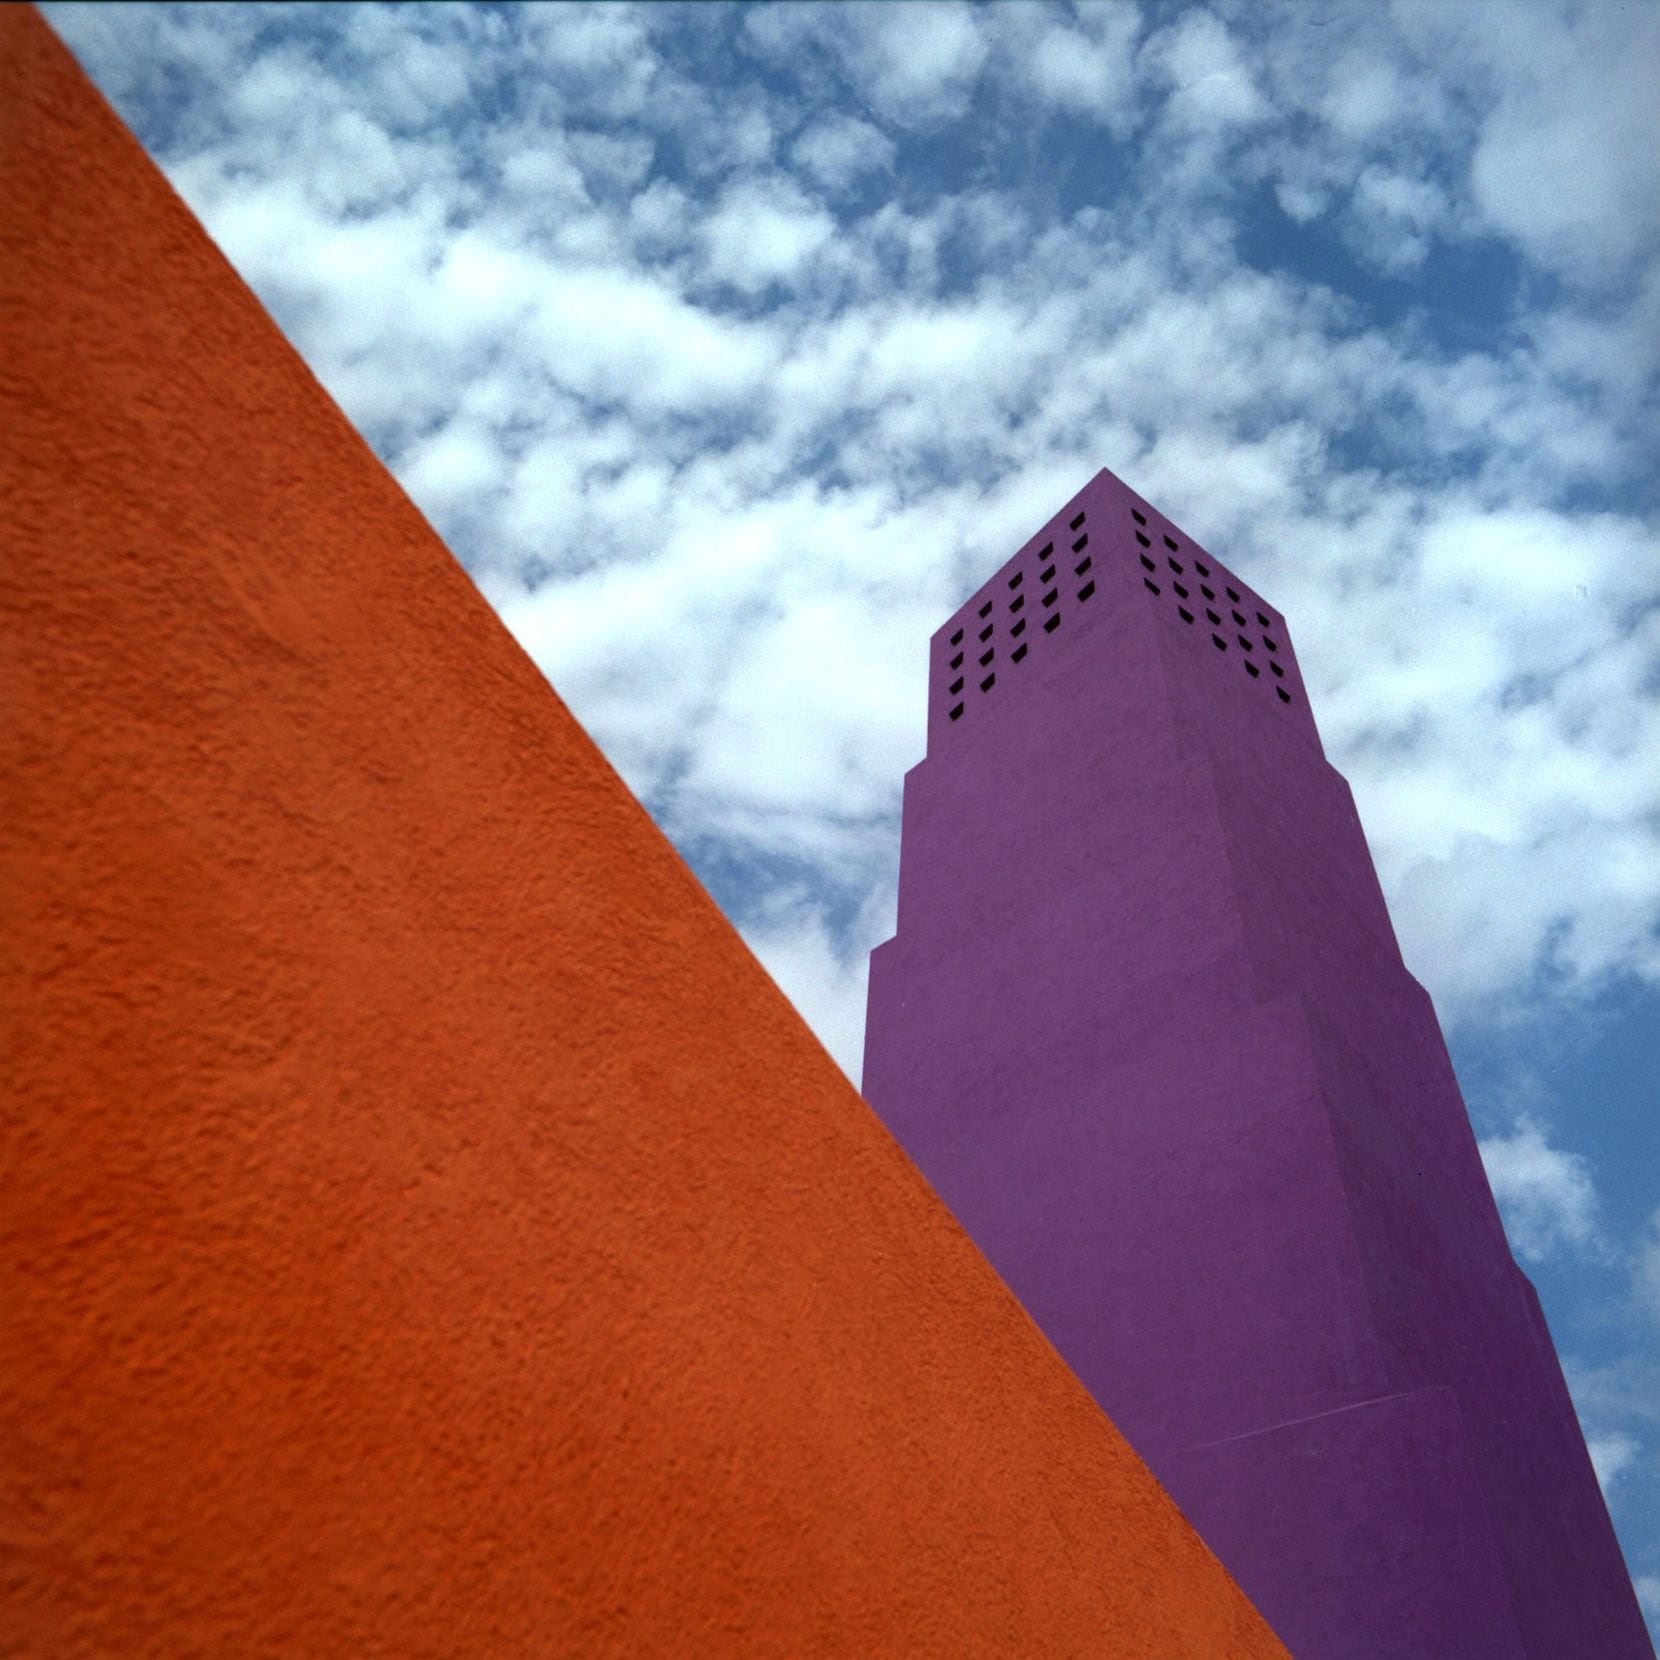 Ricardo Legorreta’s Latino Cultural Center is one of the most visually arresting structures...